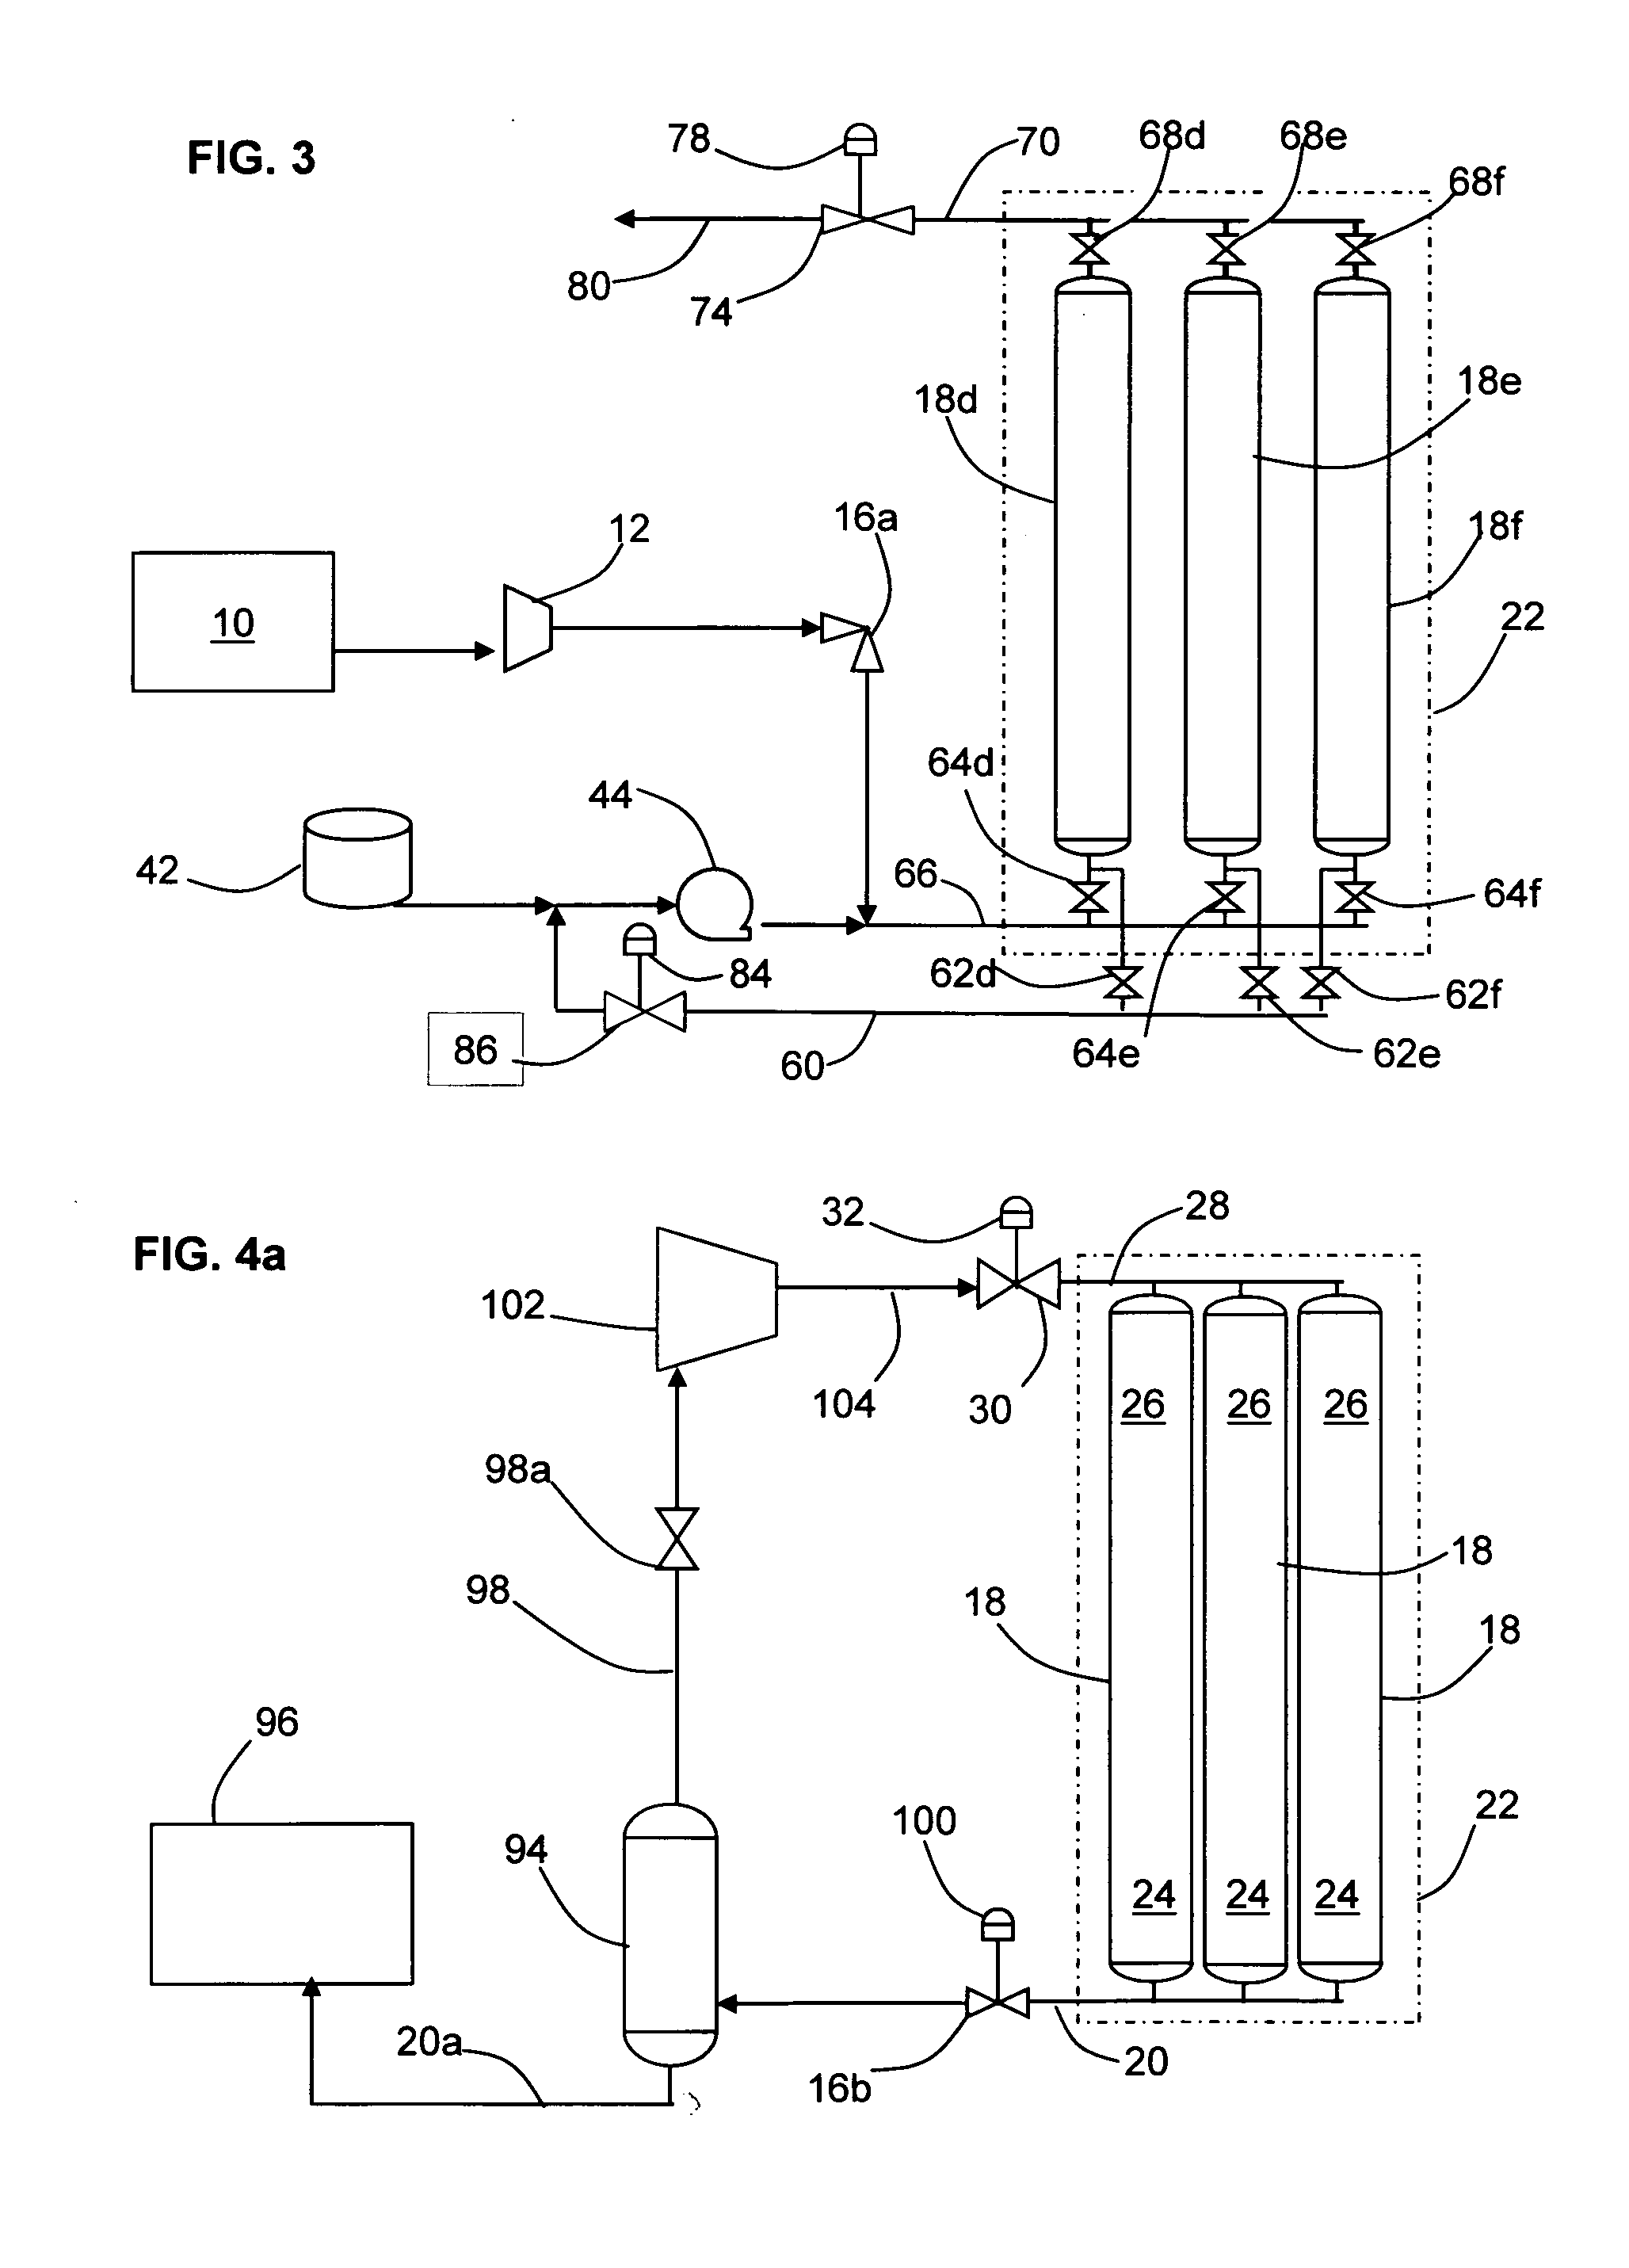 Apparatus and method for flowing compressed fluids into and out of containment